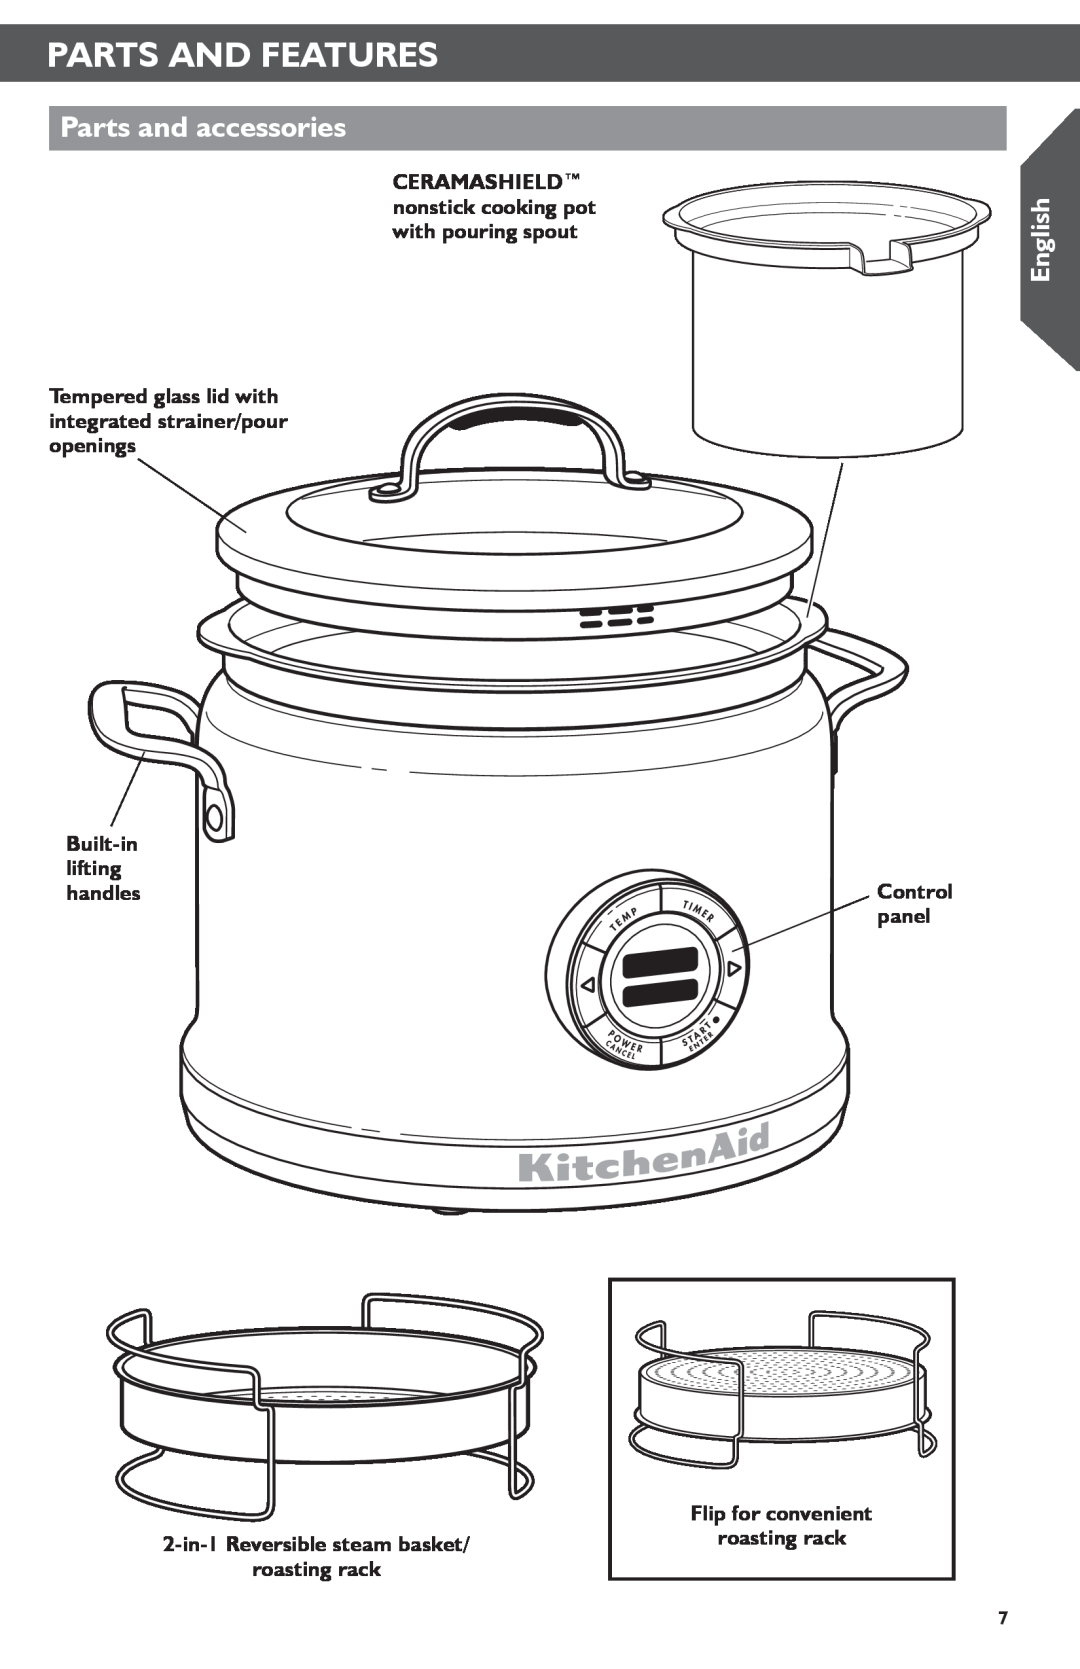 KitchenAid KMC4241 manual Parts And Features, Parts and accessories, English, Sear, Built-in lifting handles, Control panel 